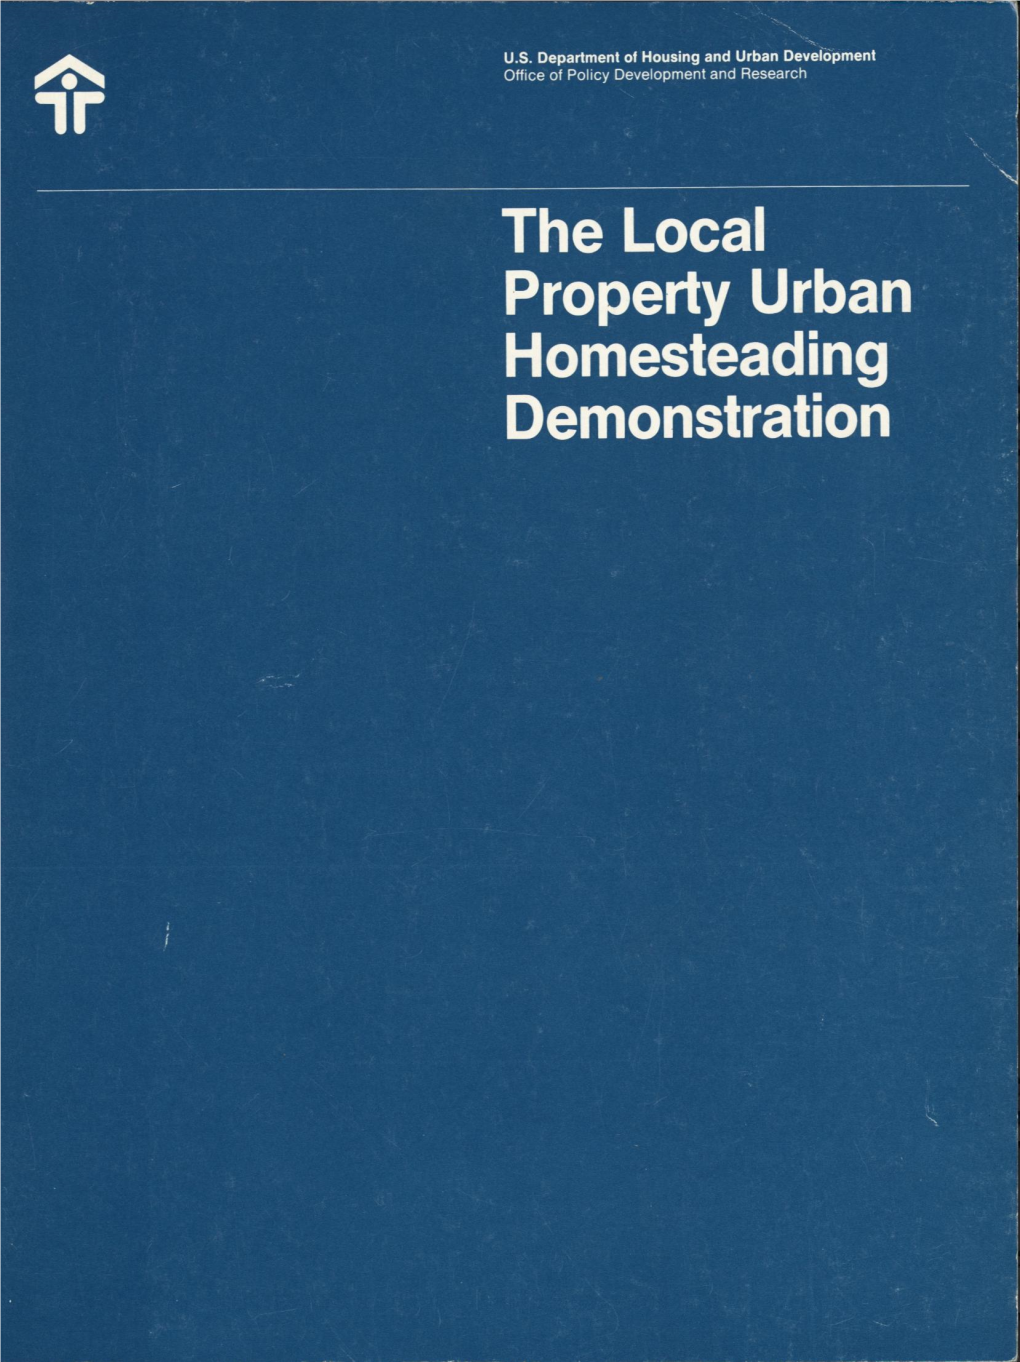 The Local Property Urban Homesteading Demonstration